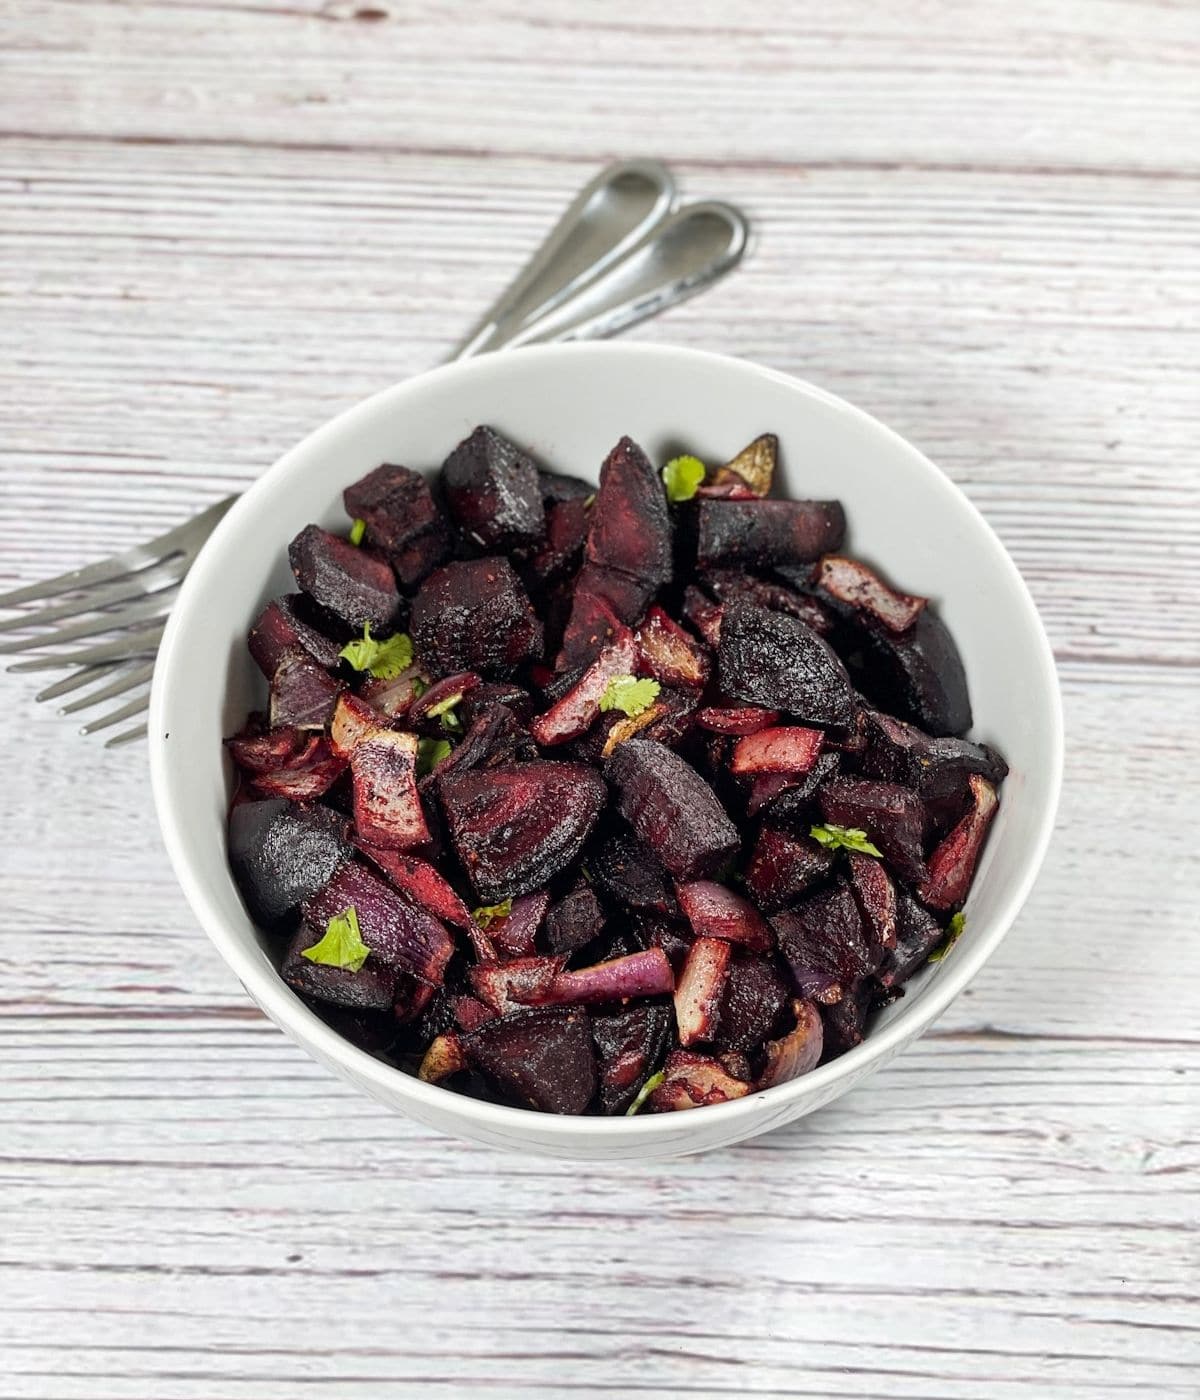 A bowl of roasted beets are on the table.